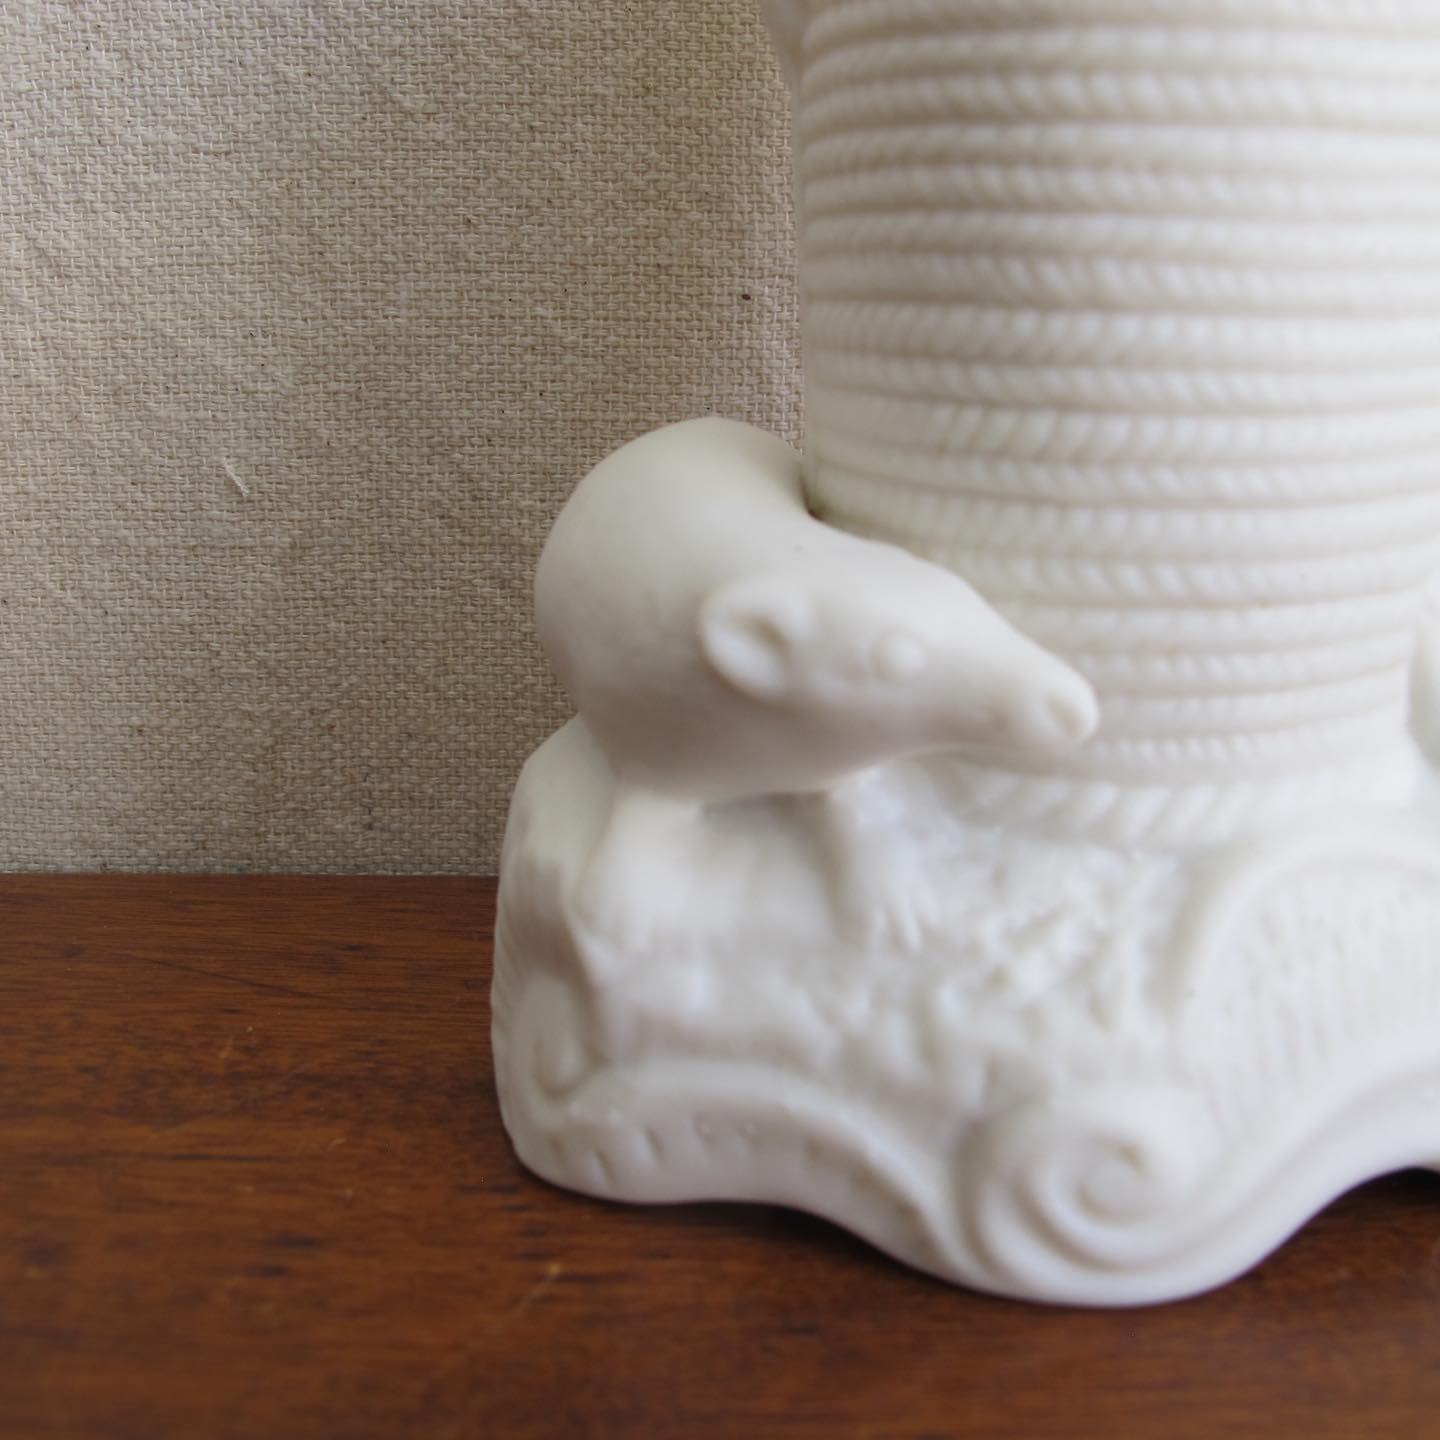 Antique Parian porcelain vase with figural mice, exploring a coil of rope, extremely rare, c. 1860 1870